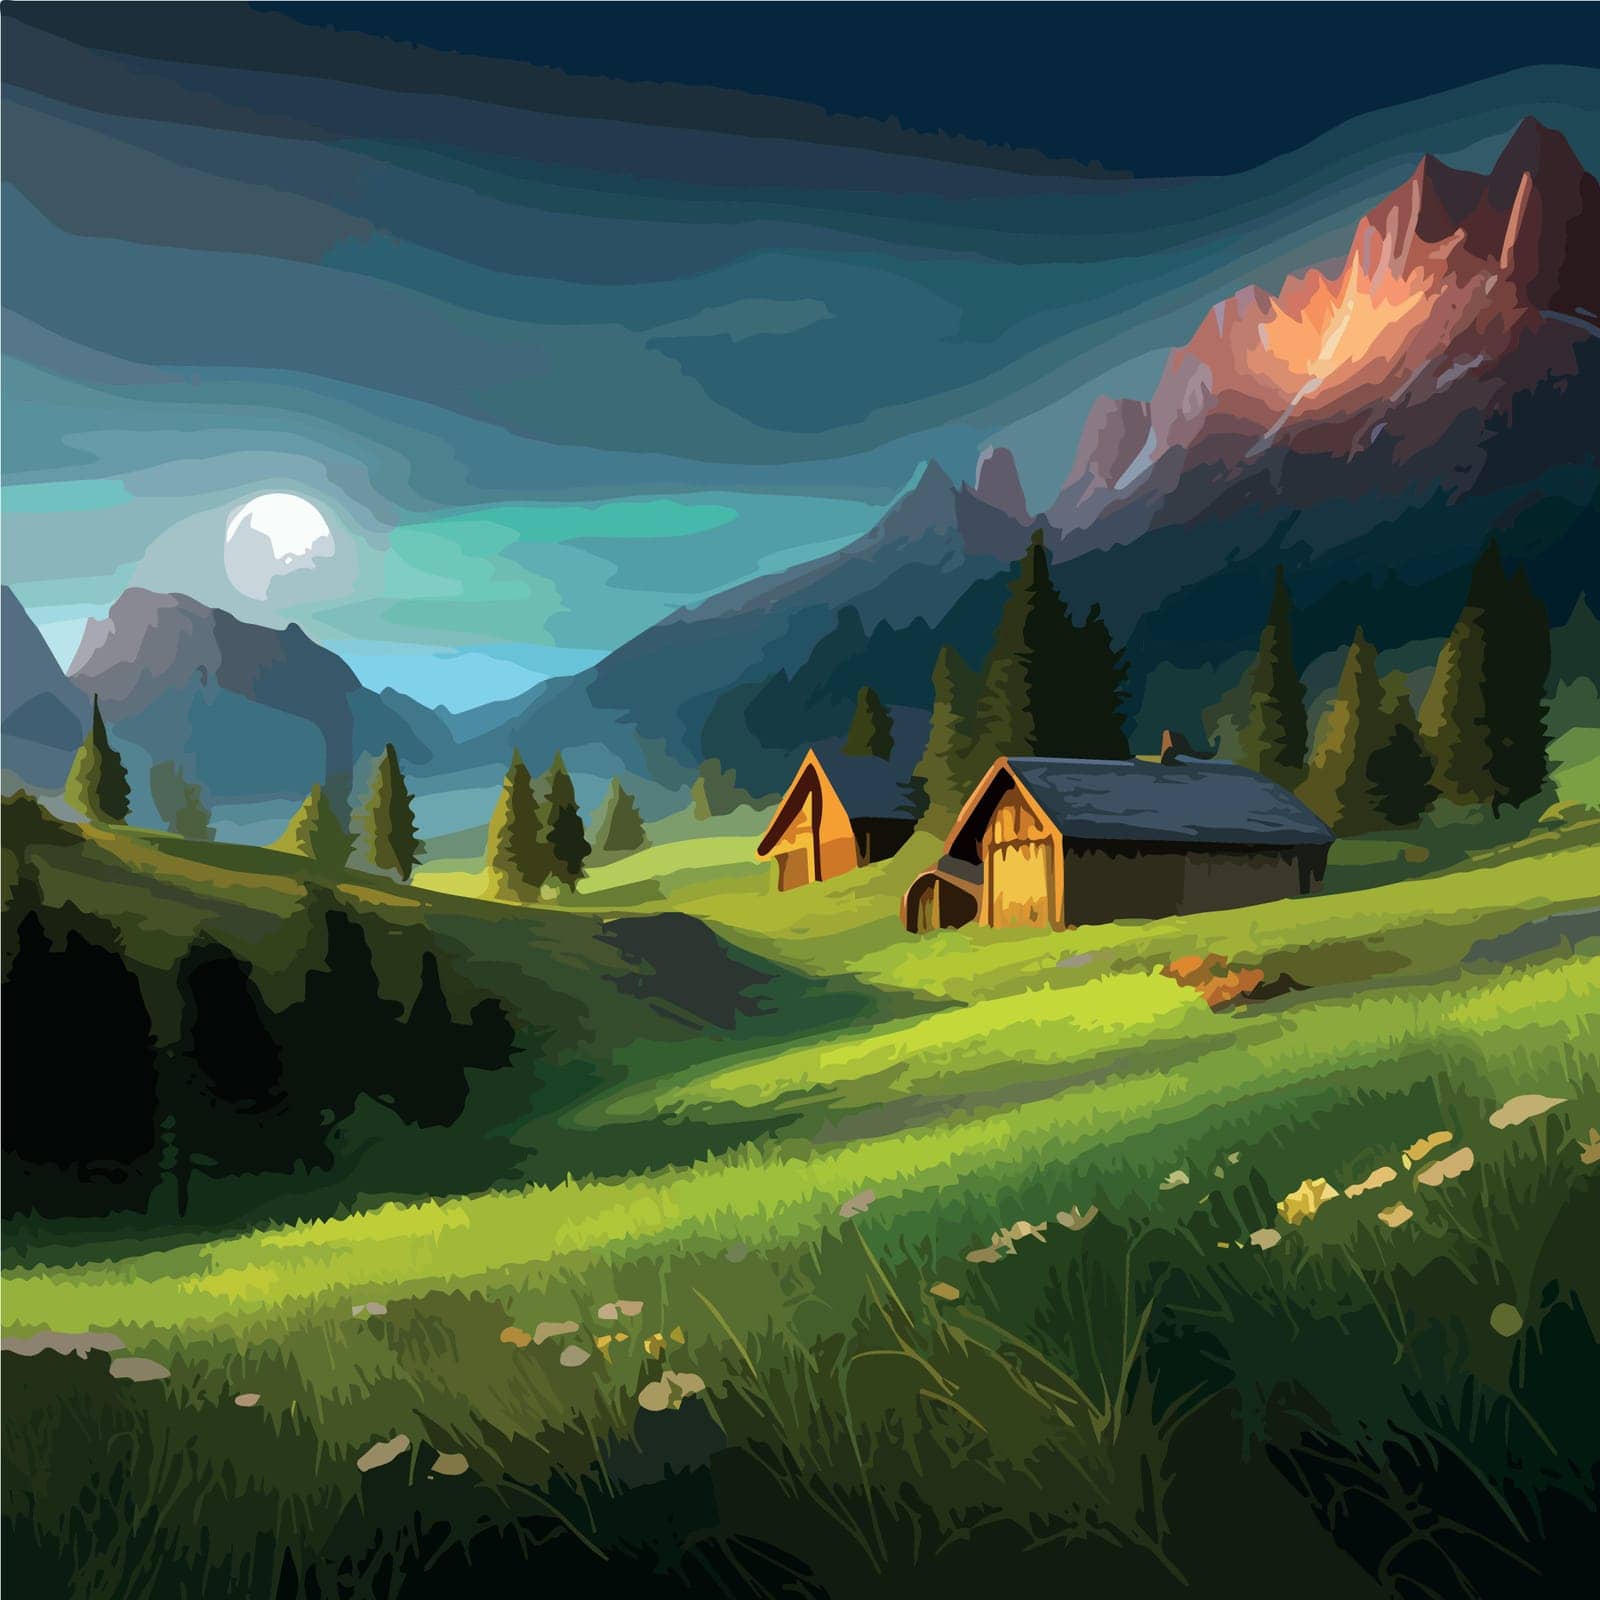 Majestic view of a wood log touristic cabin with a mountain in the background. Beautiful serene rustic landscape vector illustration.